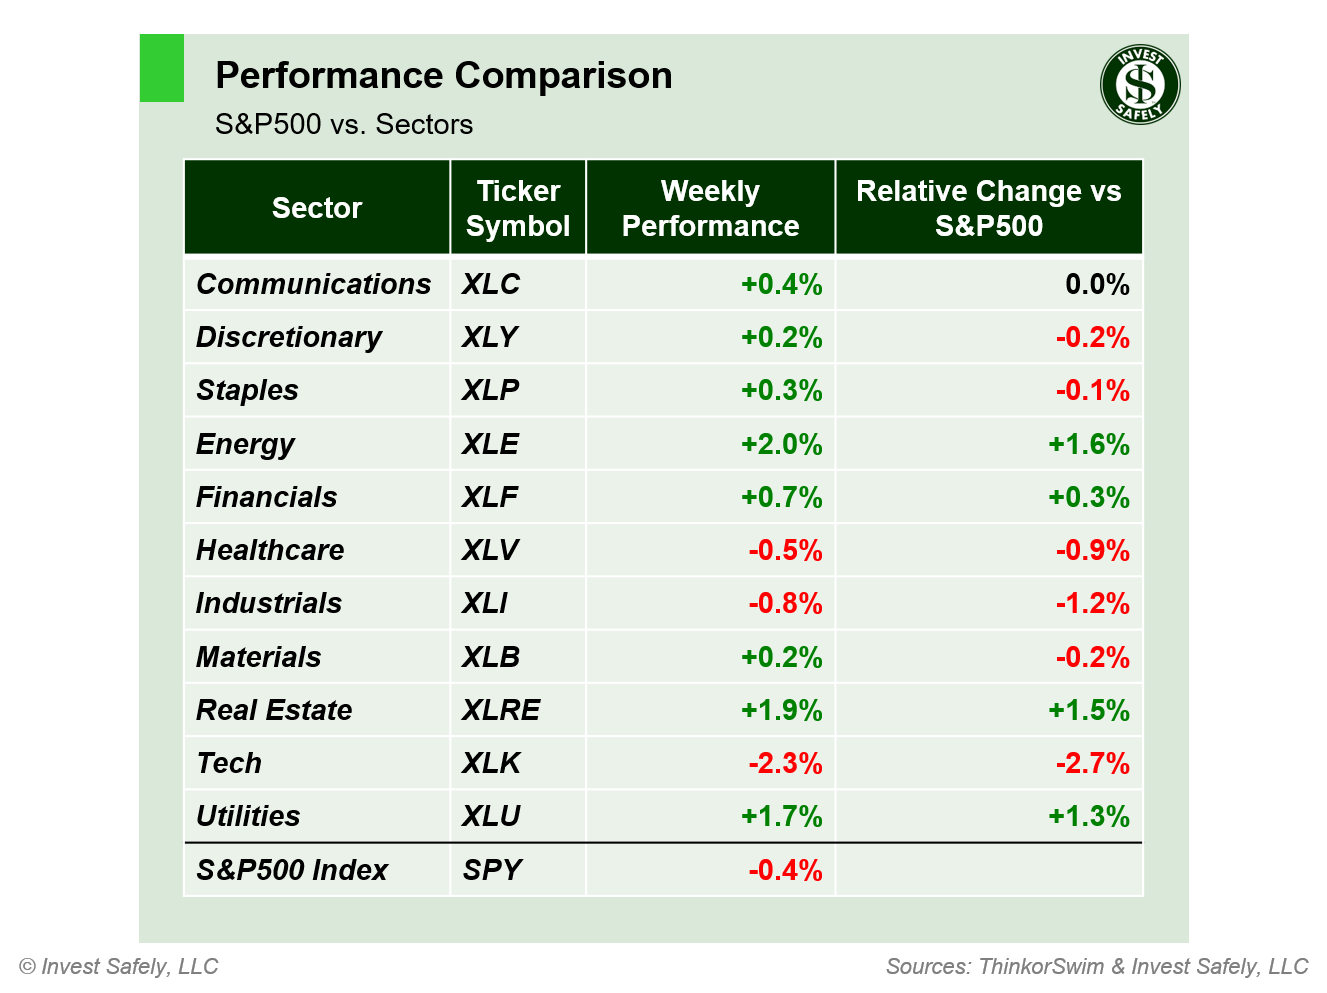 Weekly price performance of S&P500 sector ETFs